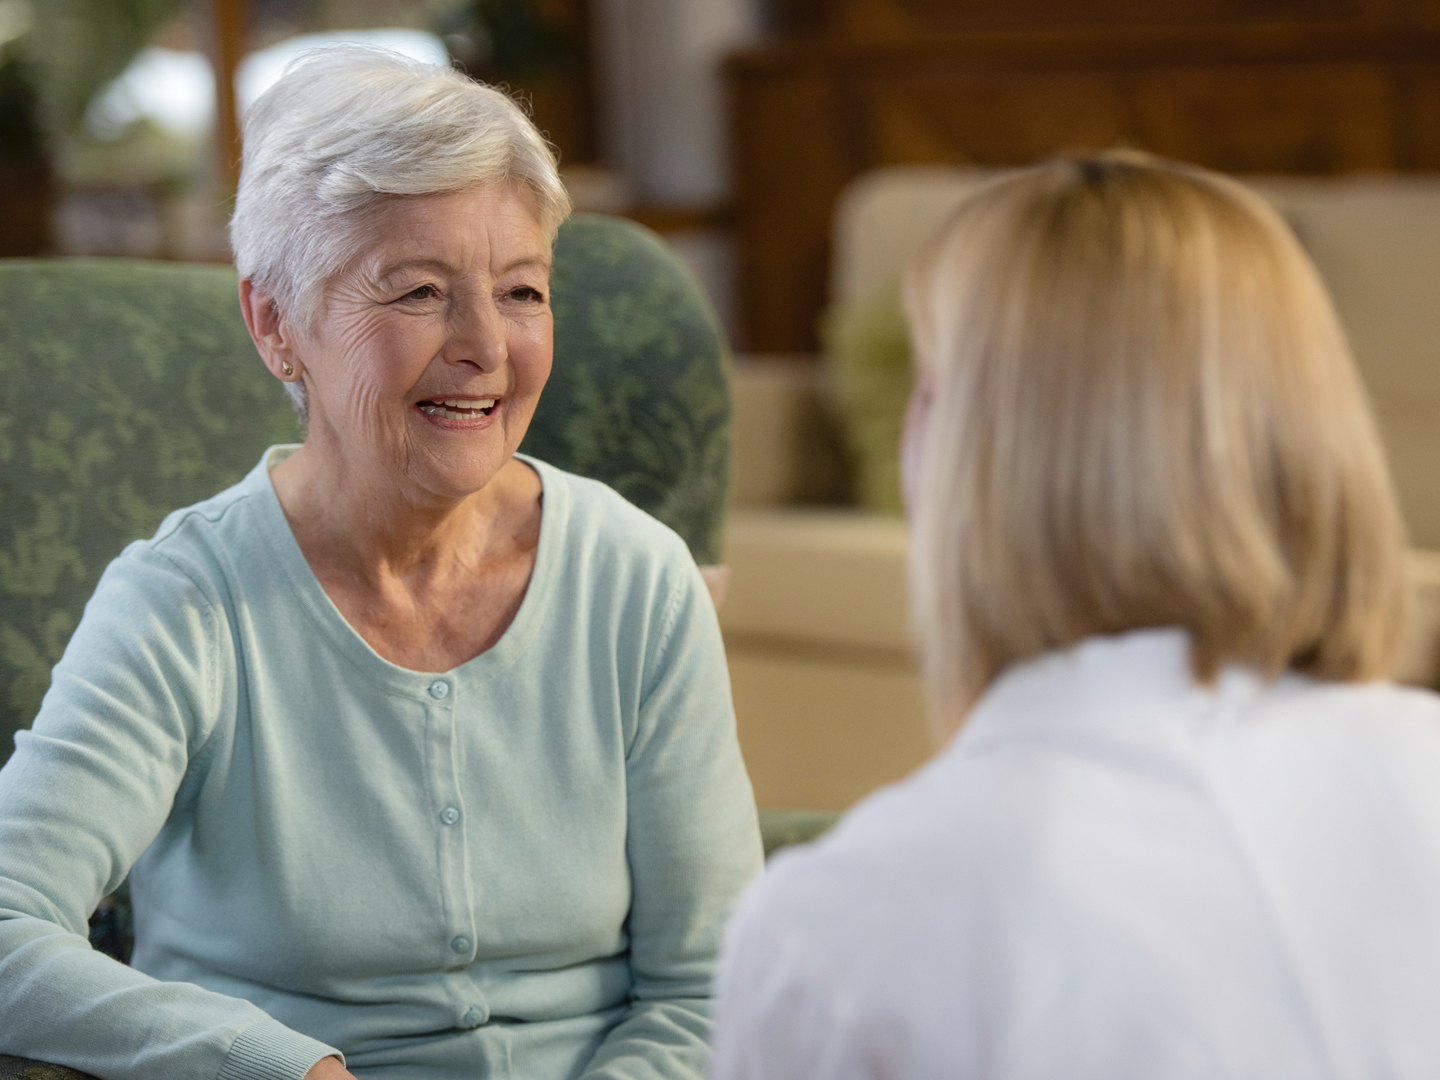 Front view of smiling senior patient sitting in armchair talking with home healthcare nurse or female doctor, rear view.